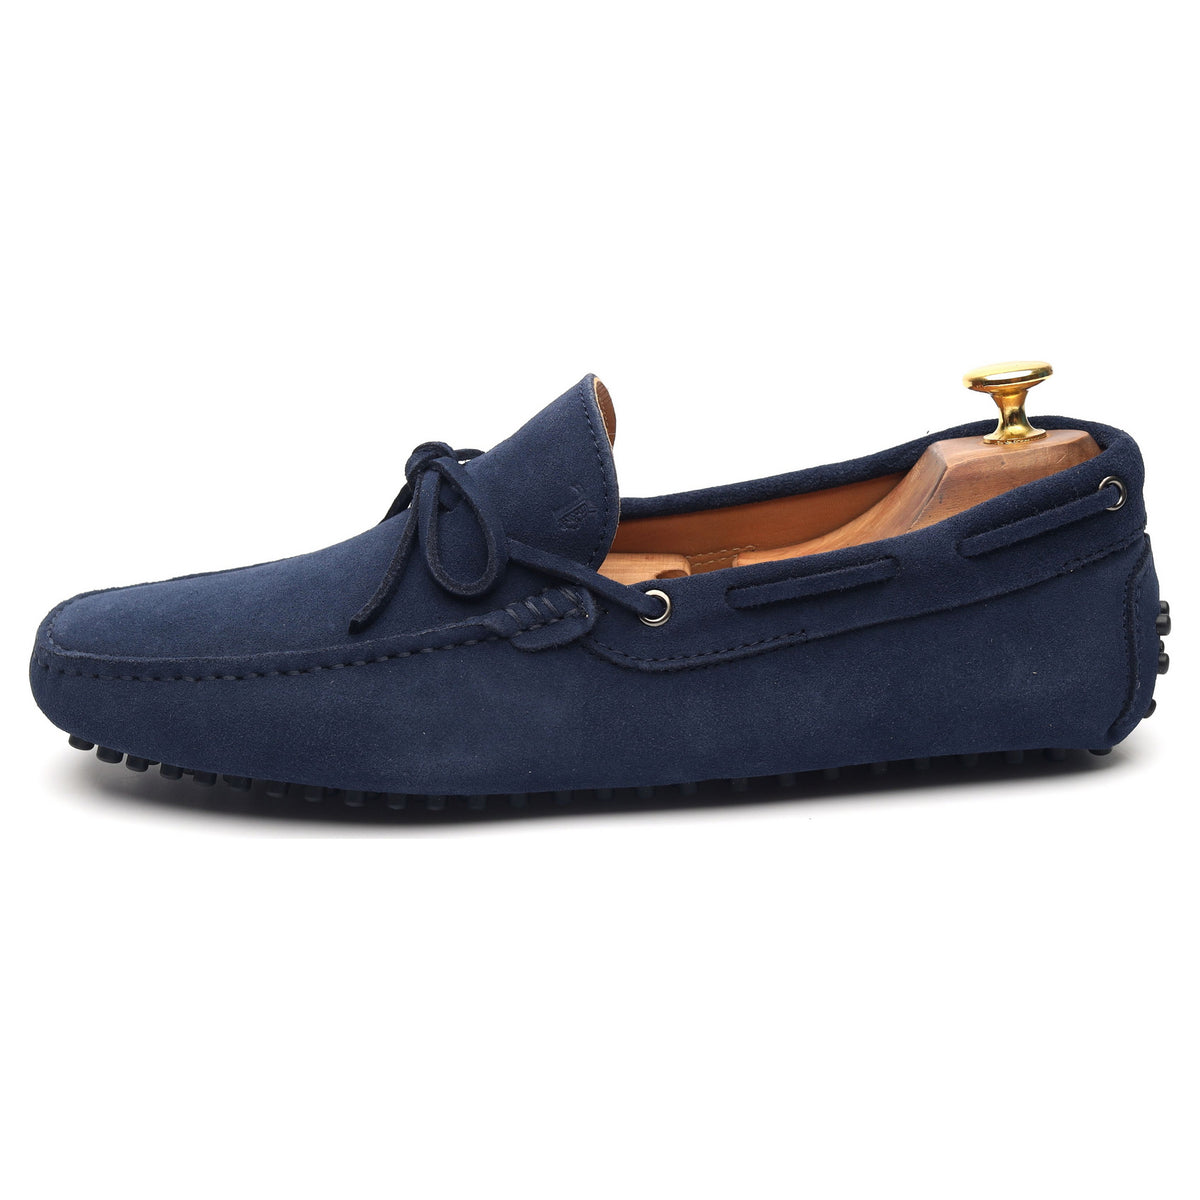 Gommino Navy Blue Suede Driving Loafers UK 8